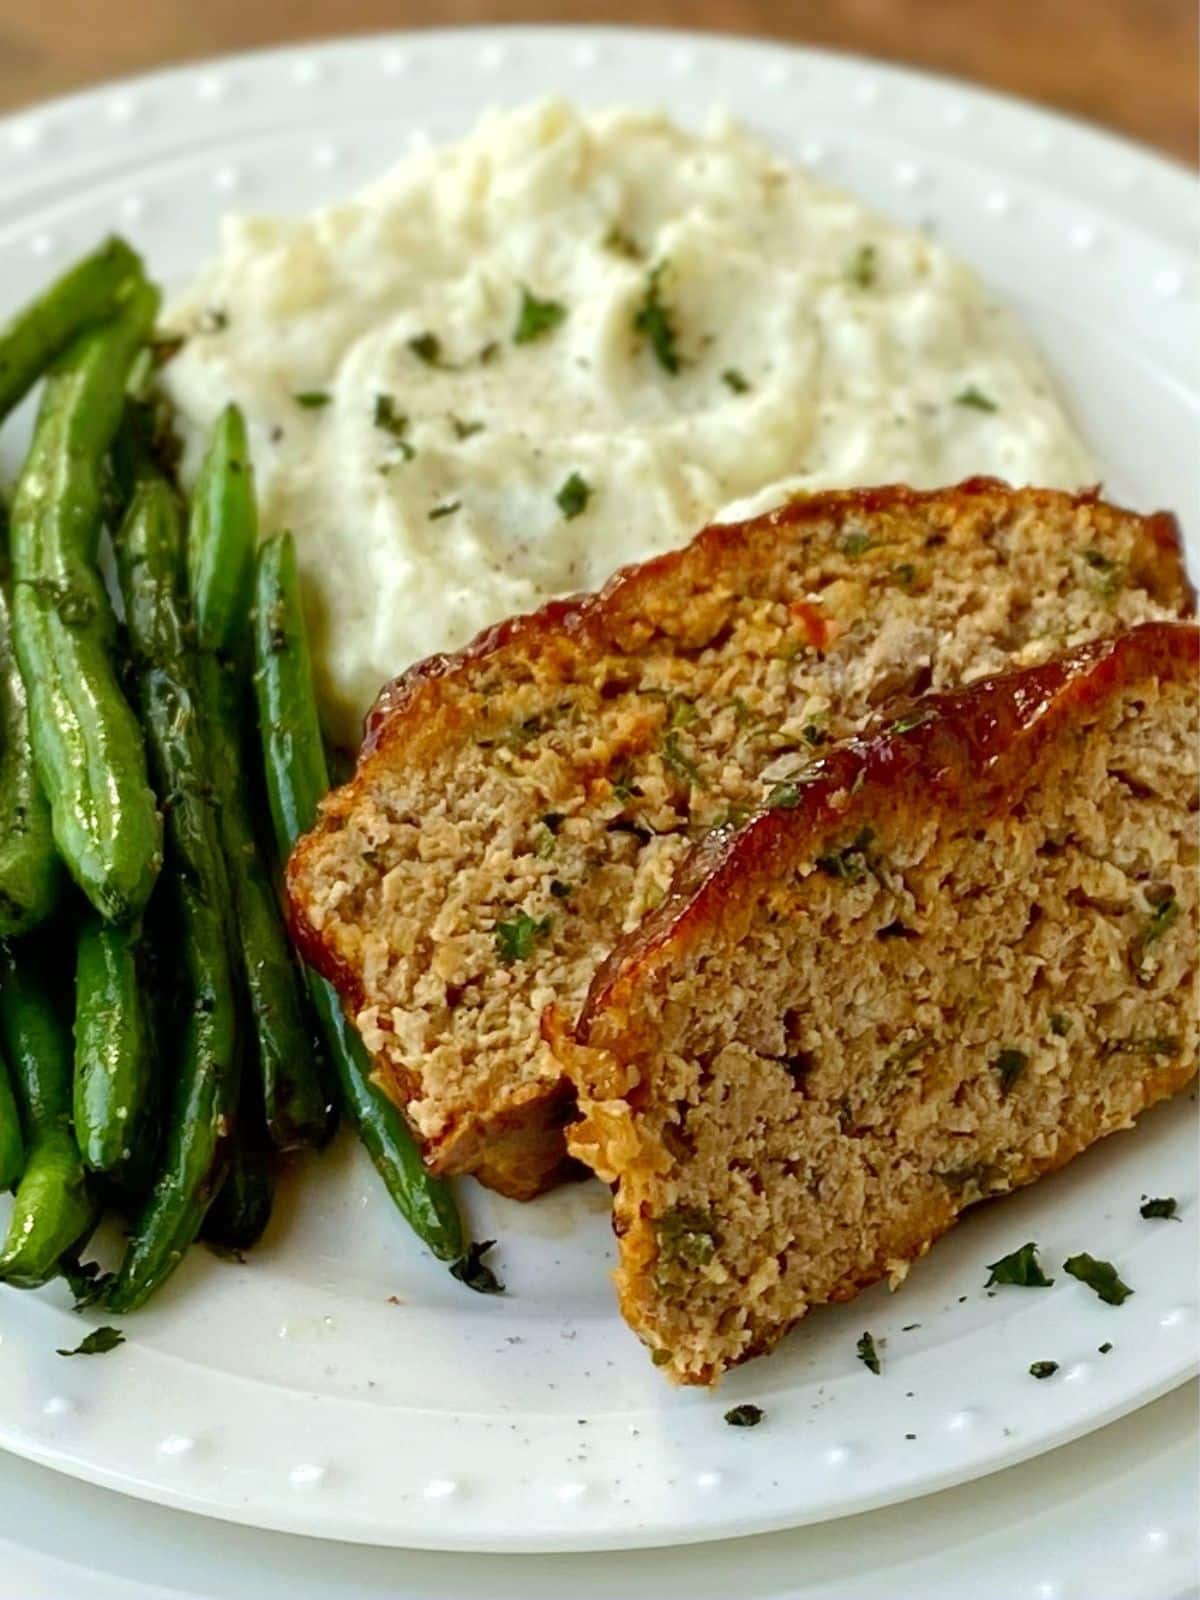 meatloaf and sides on a white plate.